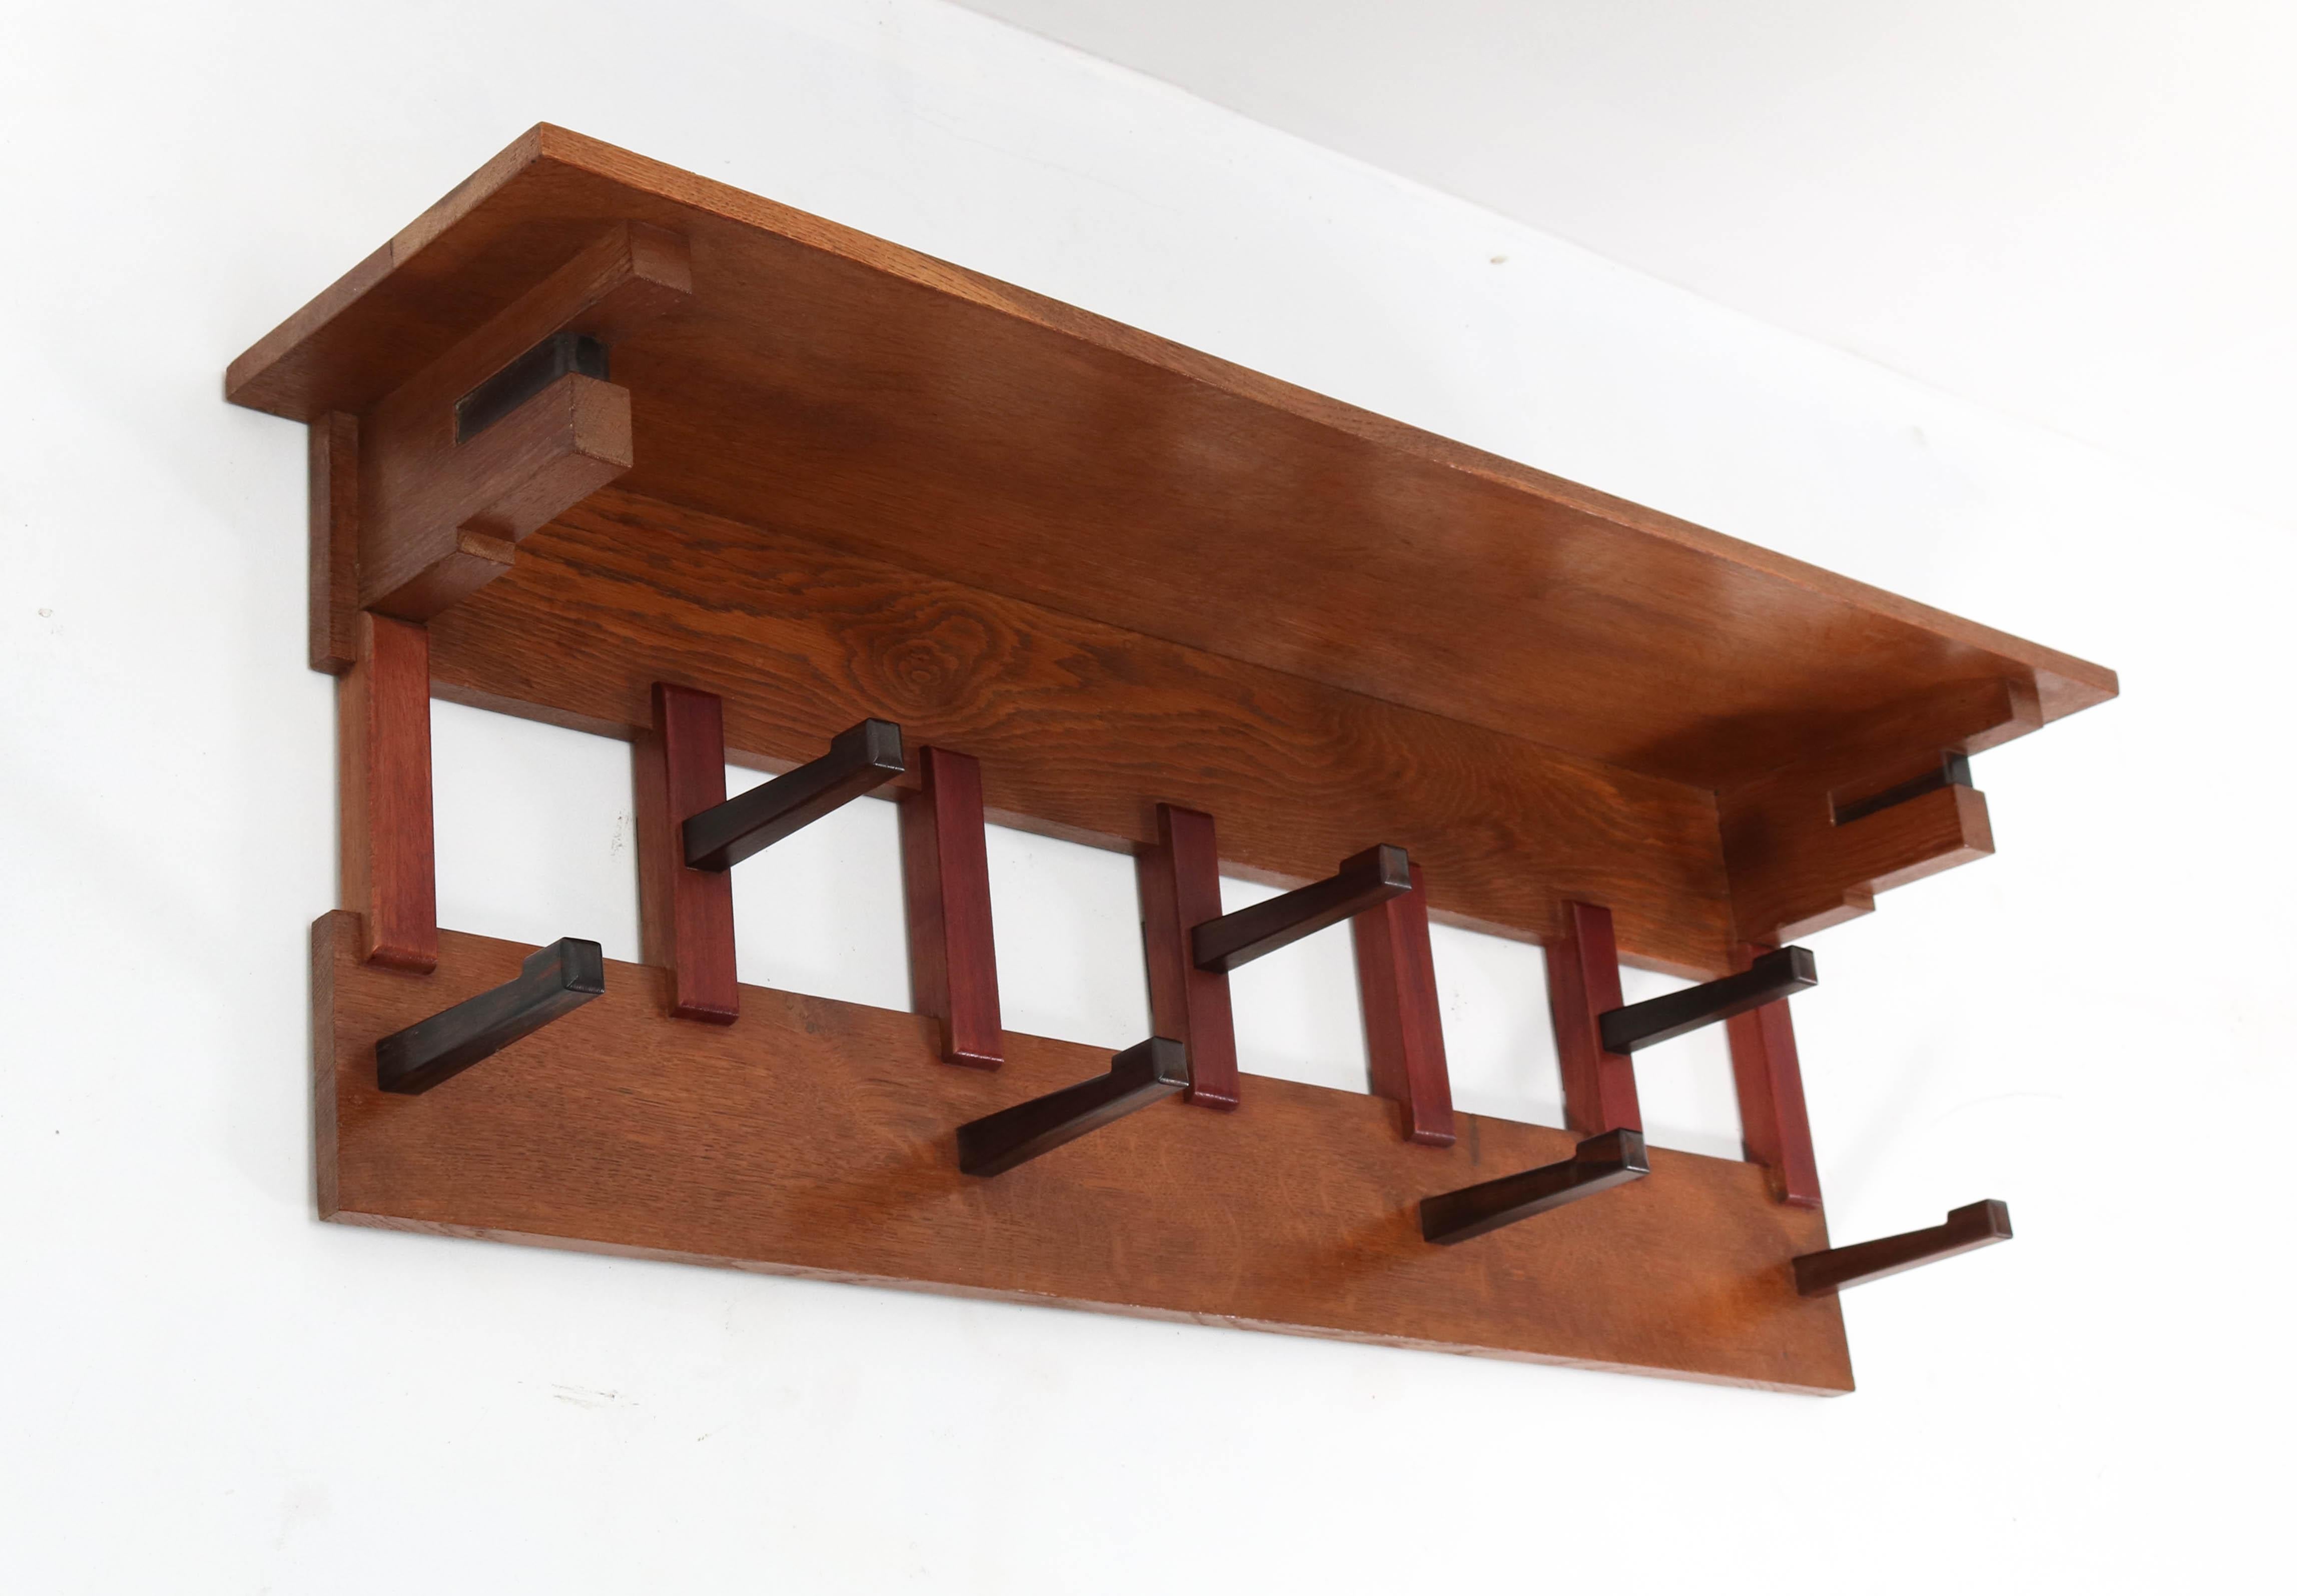 Stunning and elegant Art Deco Haagse School coat rack.
Design by P.E.L. Izeren for Genneper Molen.
Striking Dutch design from the twenties.
Solid oak and mahogany with 7 original solid Macassar ebony hooks.
Marked with original manufacturers